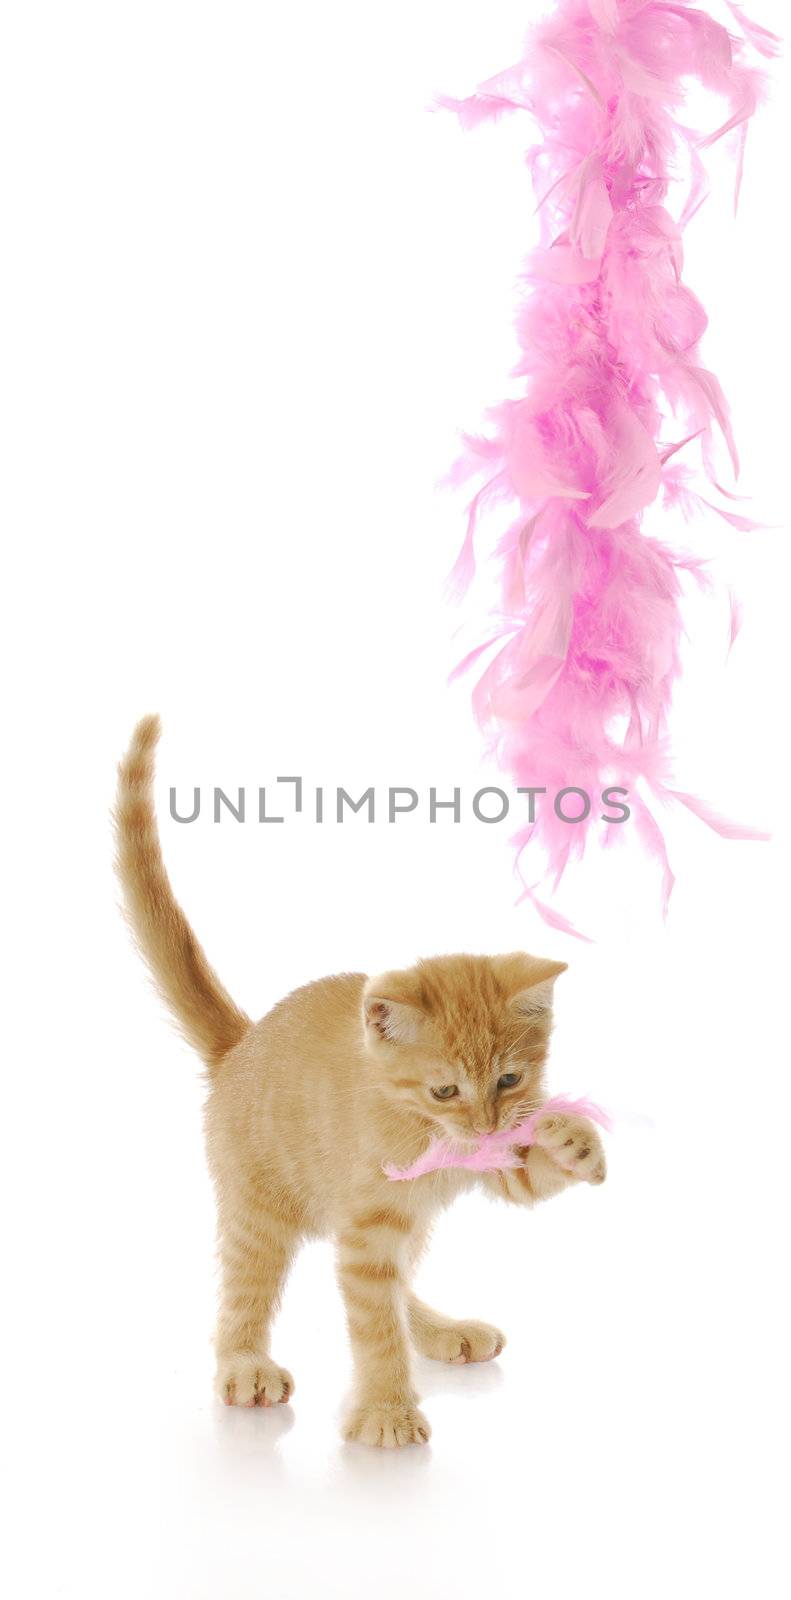 kitten playing - nine week old kitten playing with pink feather boa with reflection on white background